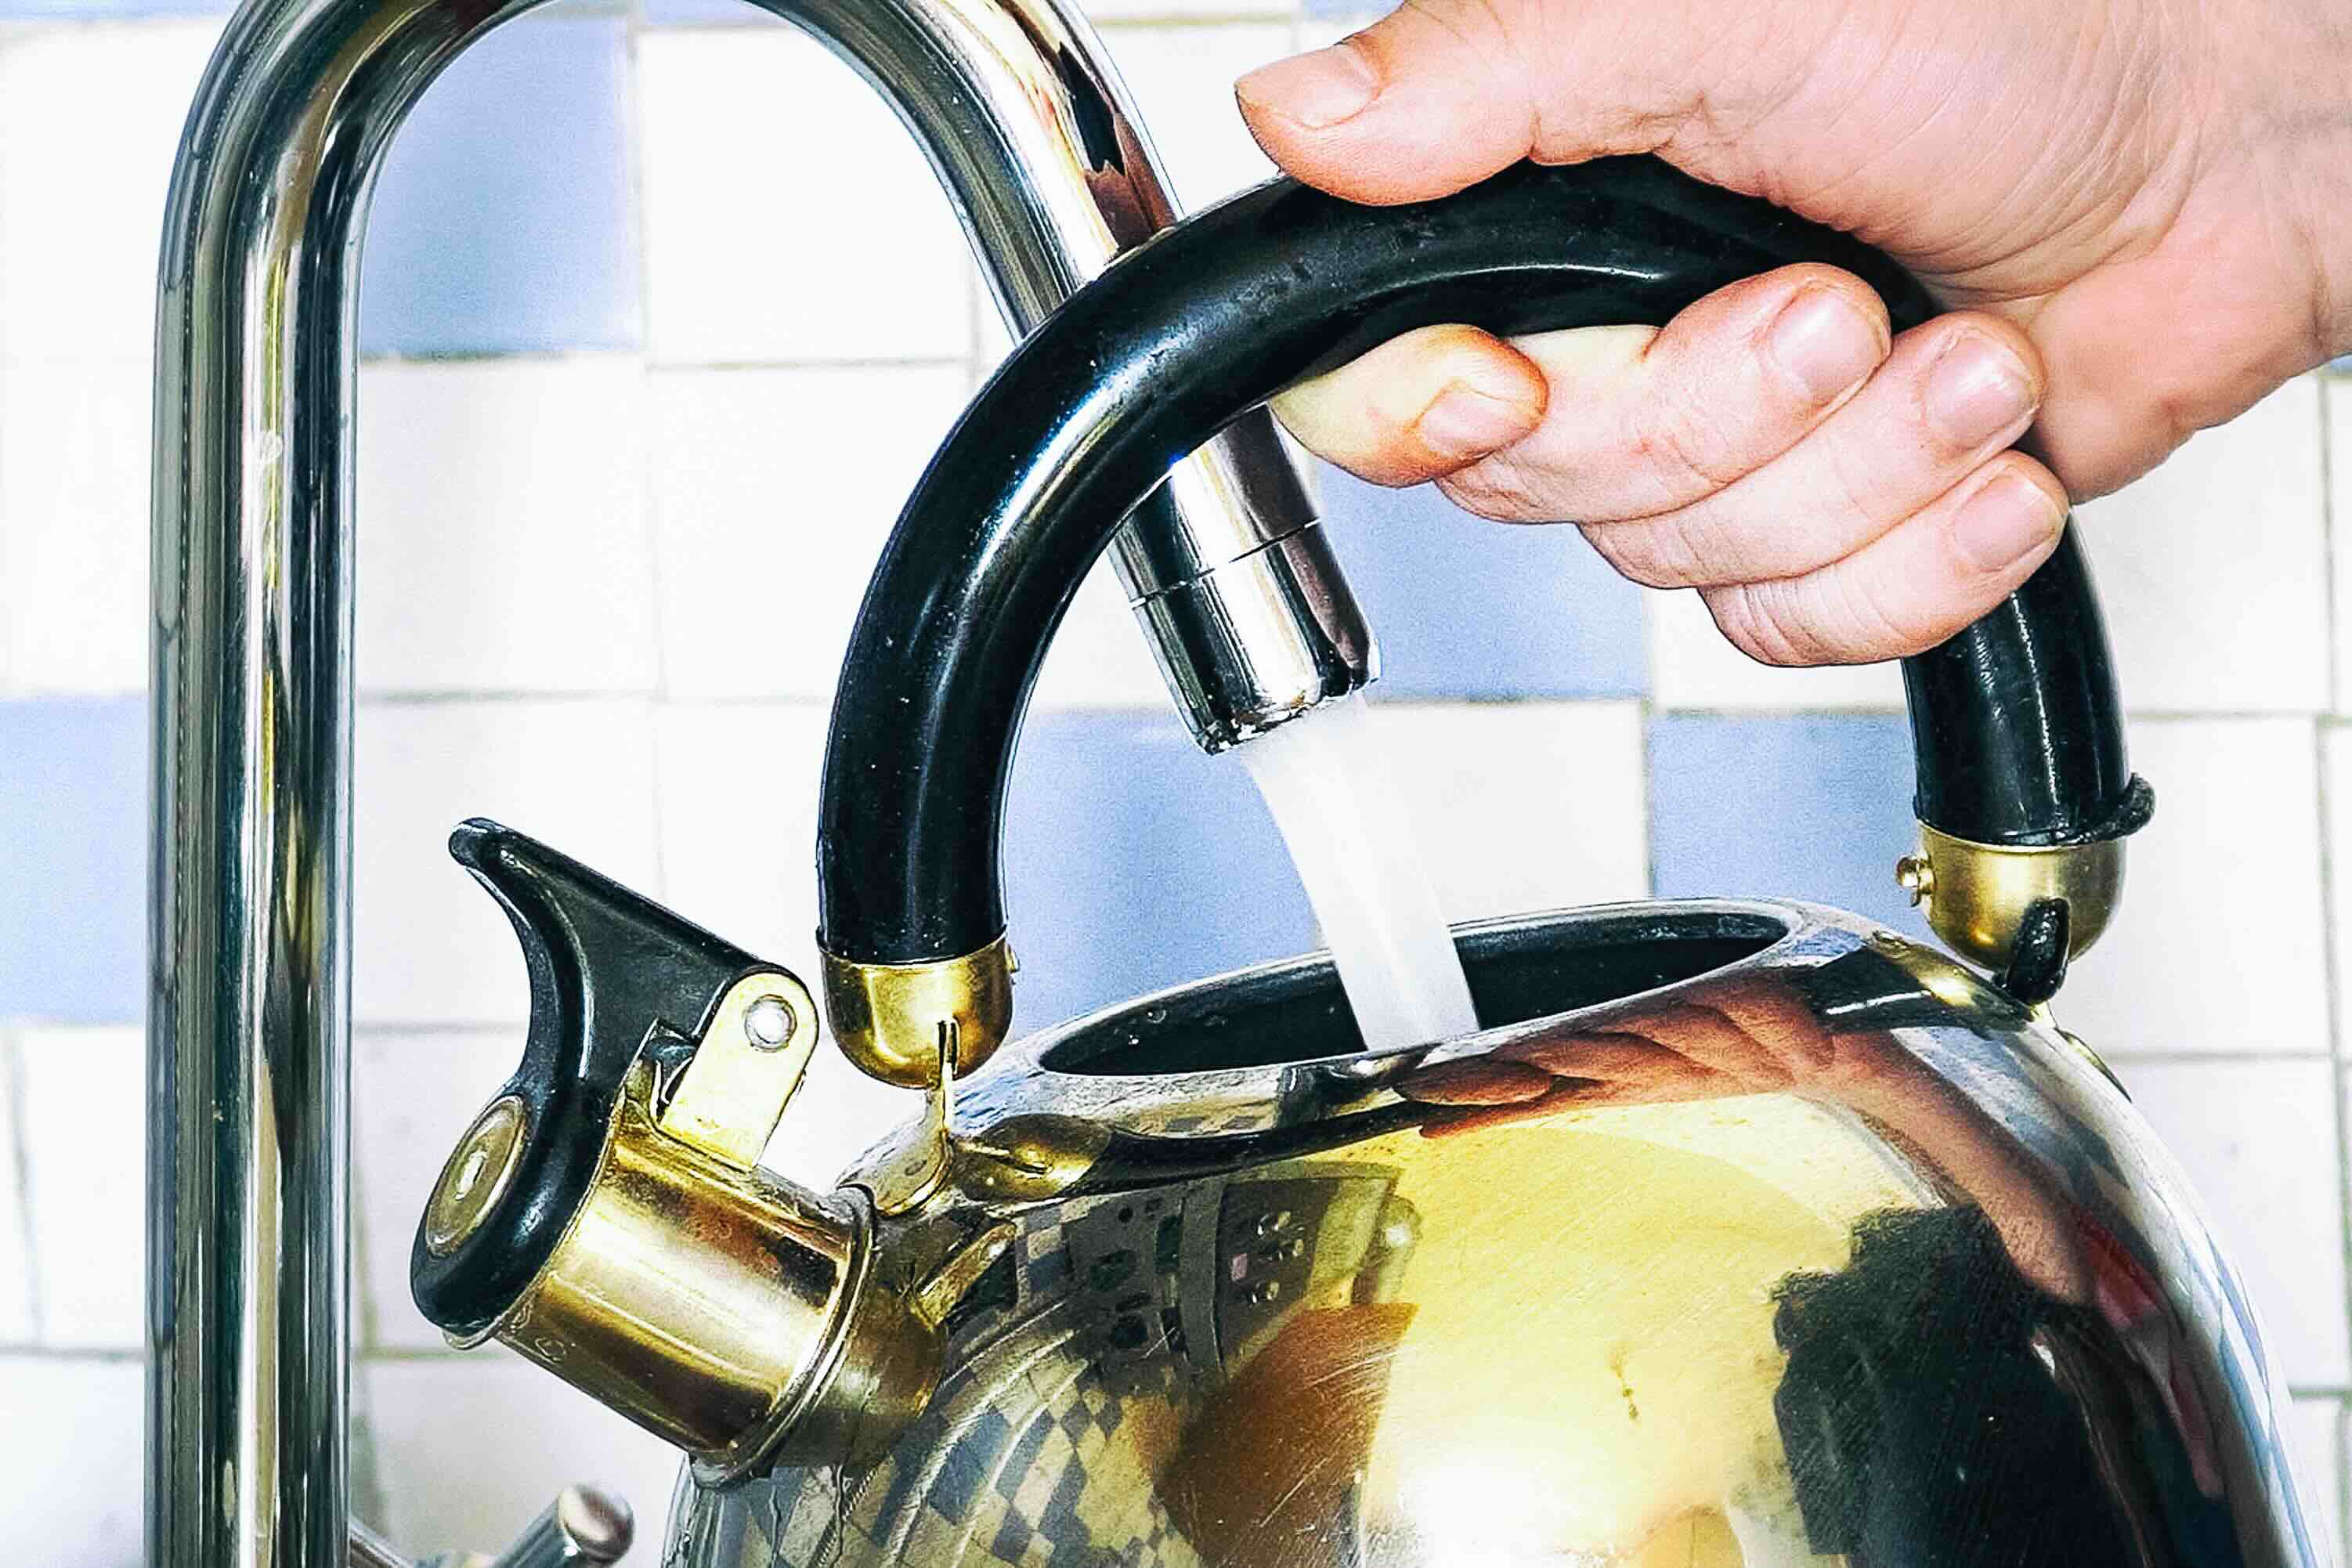 How To Get Rust Out Of Kettle